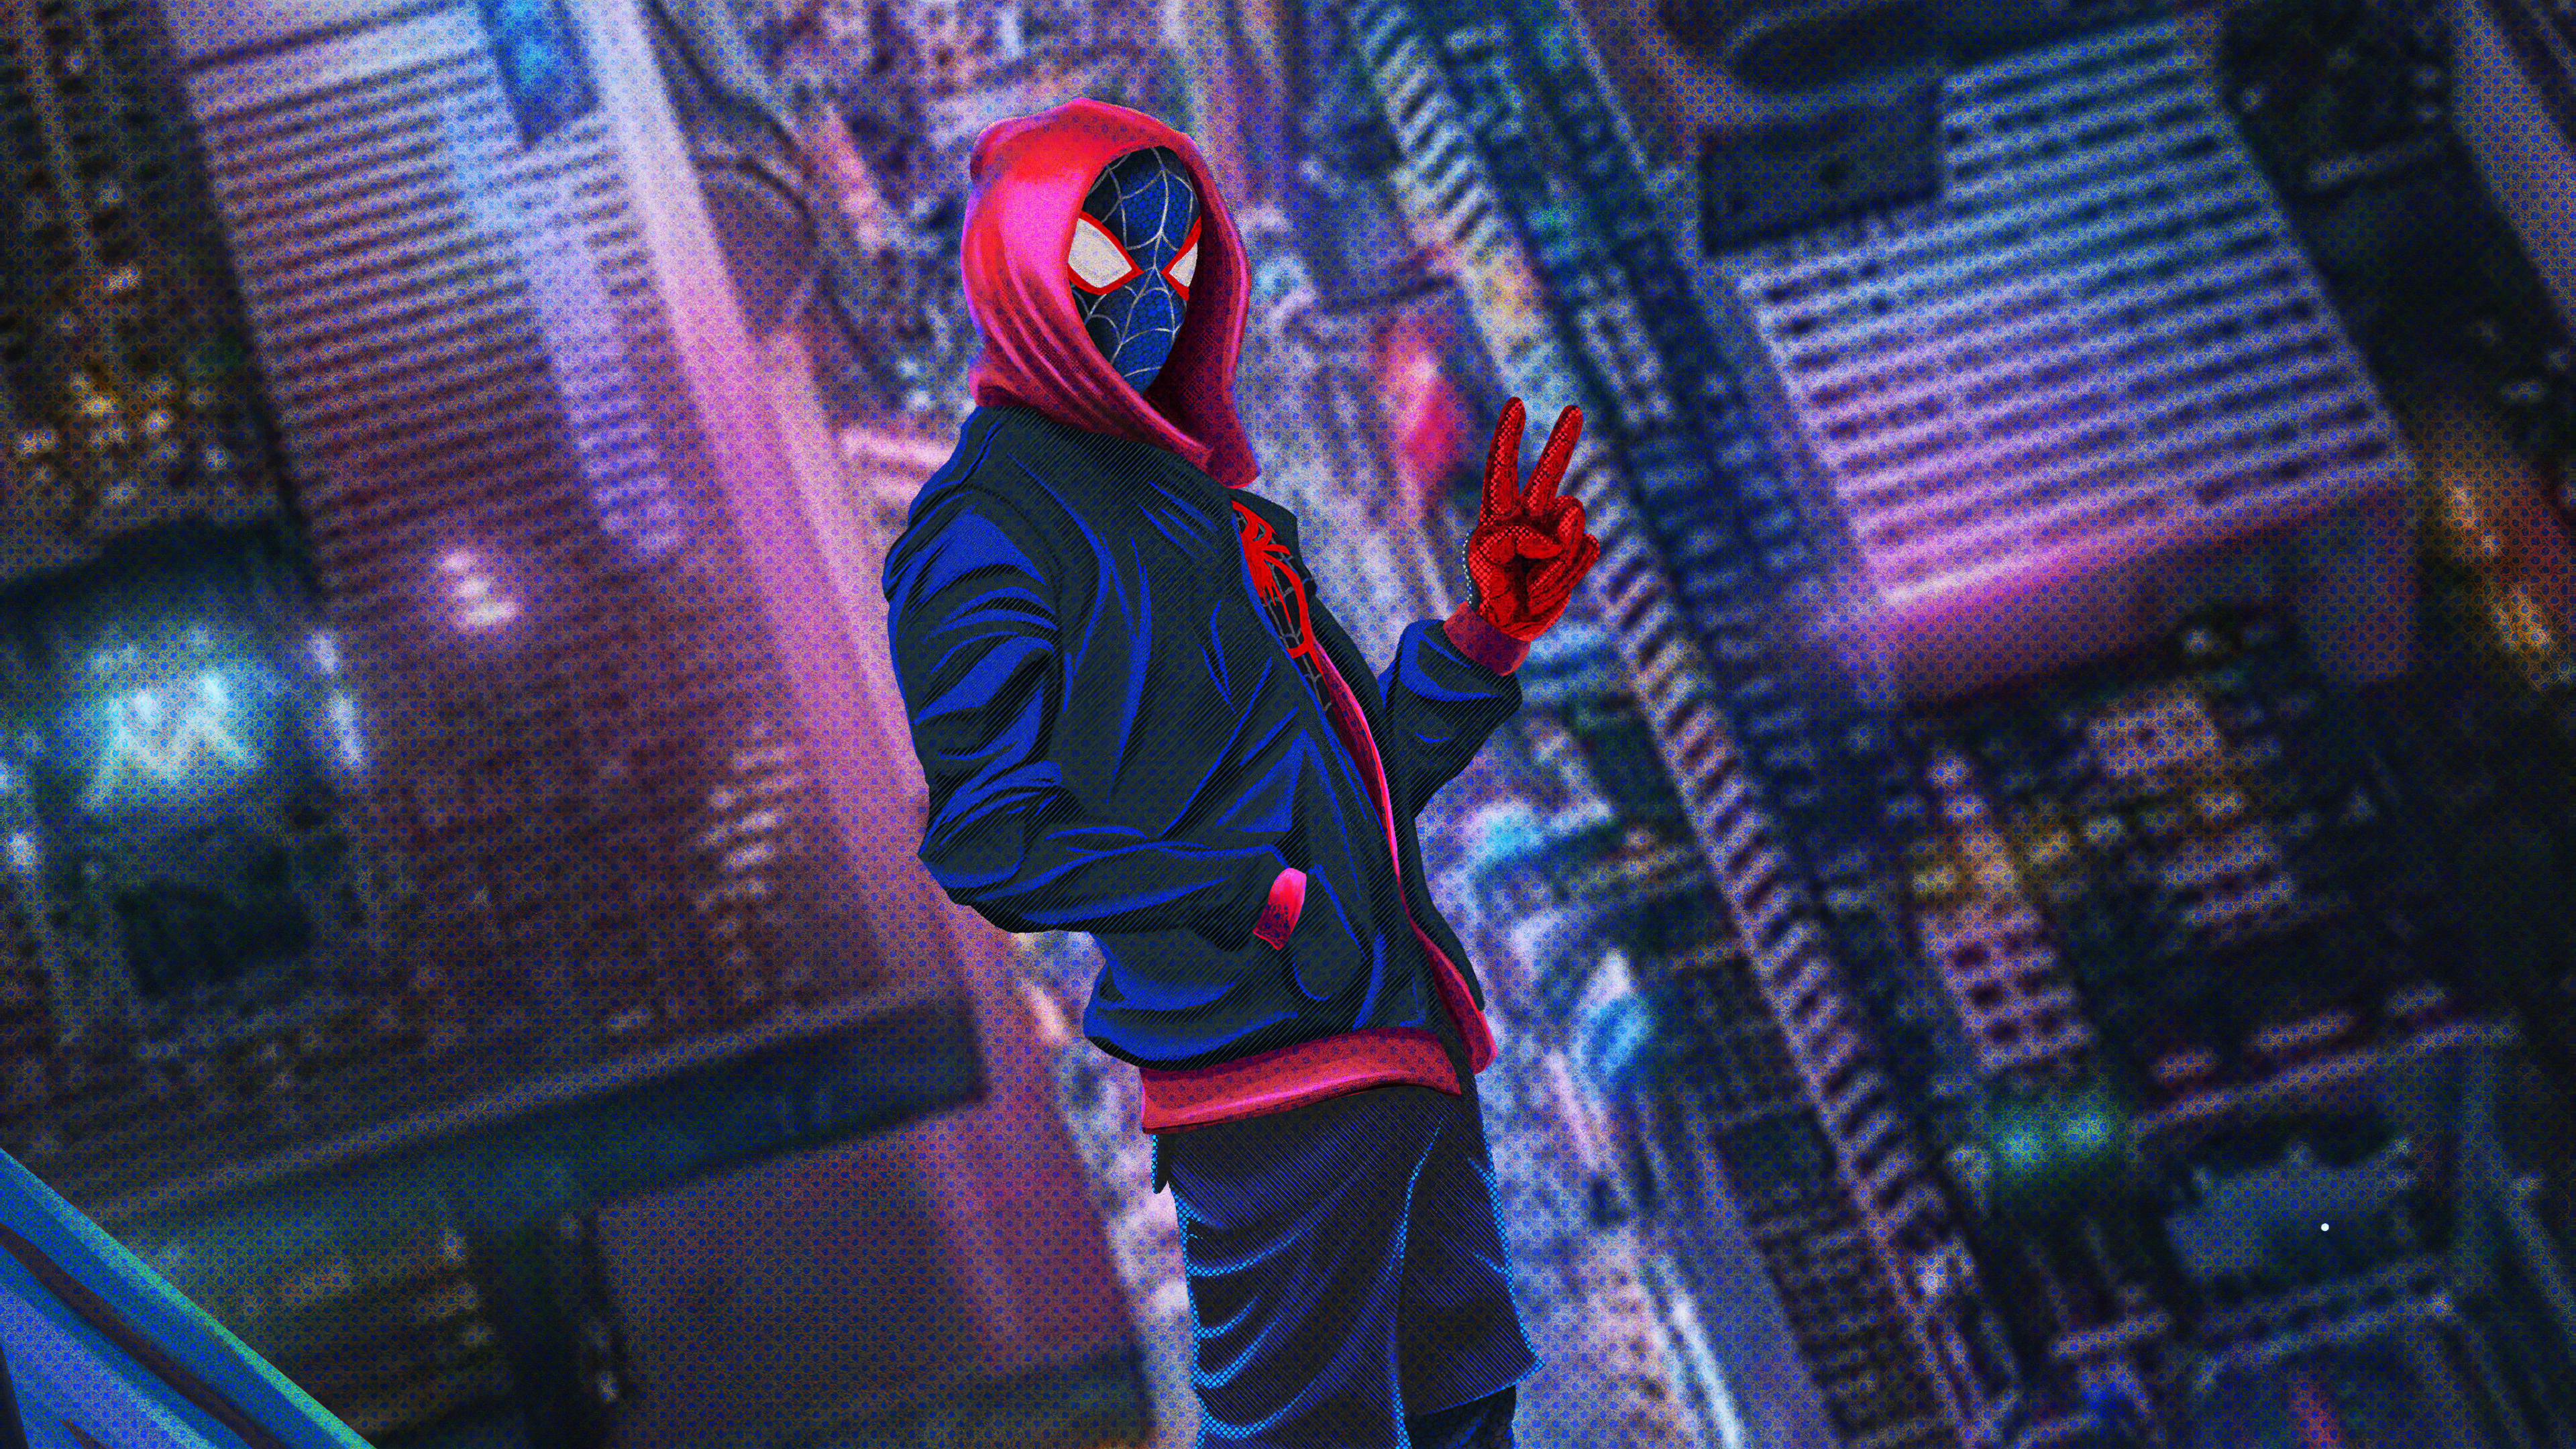 Spider-Man: Into The Spider-Verse 4k Ultra HD Wallpaper by Brent Knight